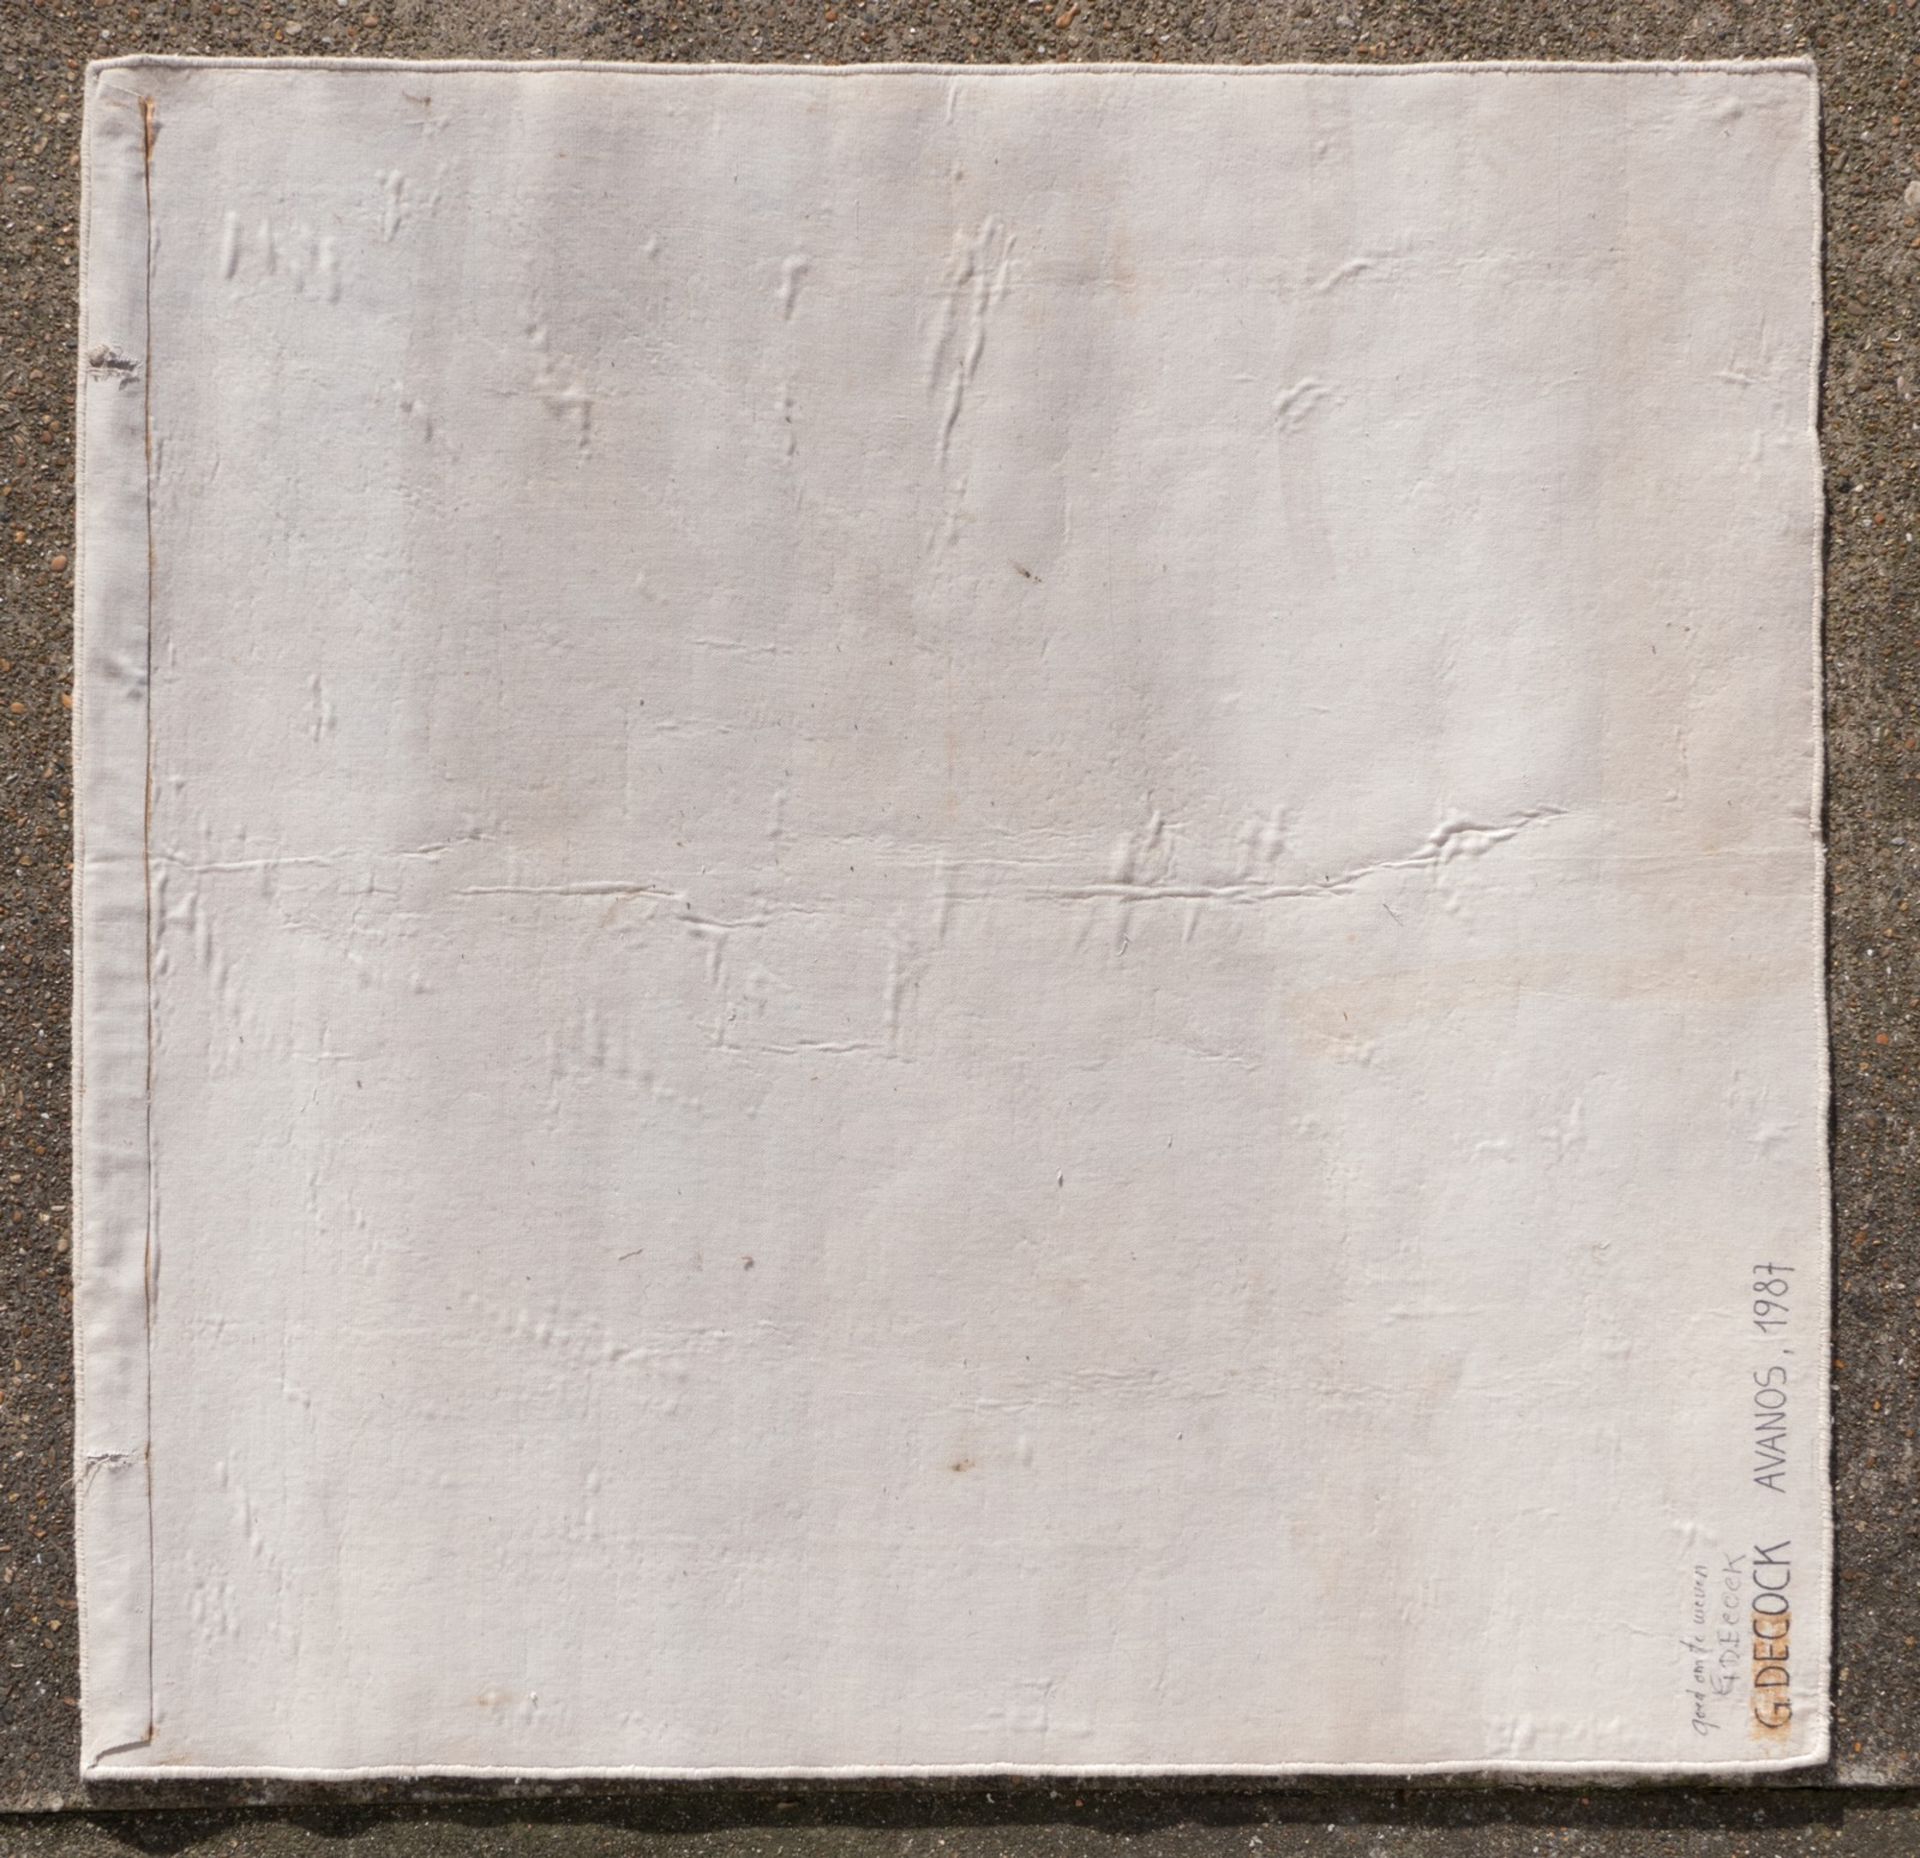 Decock G., Avanos, wool on cotton, dated 1987 (with certificate), circa 2 x 2 m - Image 2 of 3